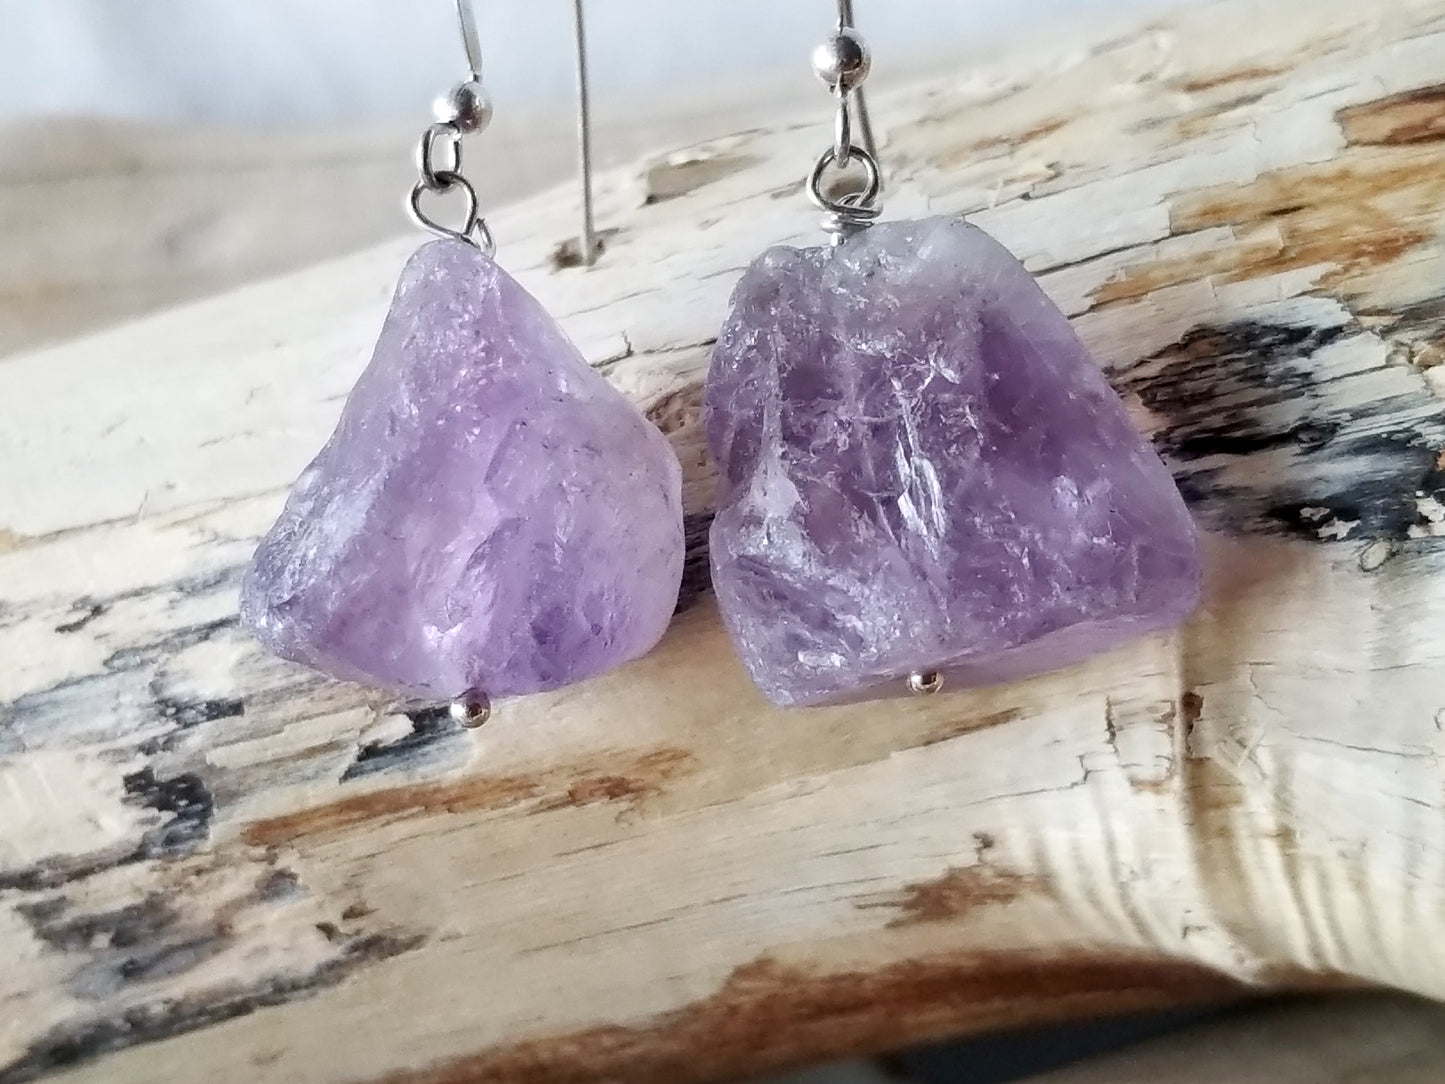 Amethyst Peace Nugget Earrings made with Sterling Silver &Rough Natural Amethyst Nuggets, Purple, Lavender Gemstones. 